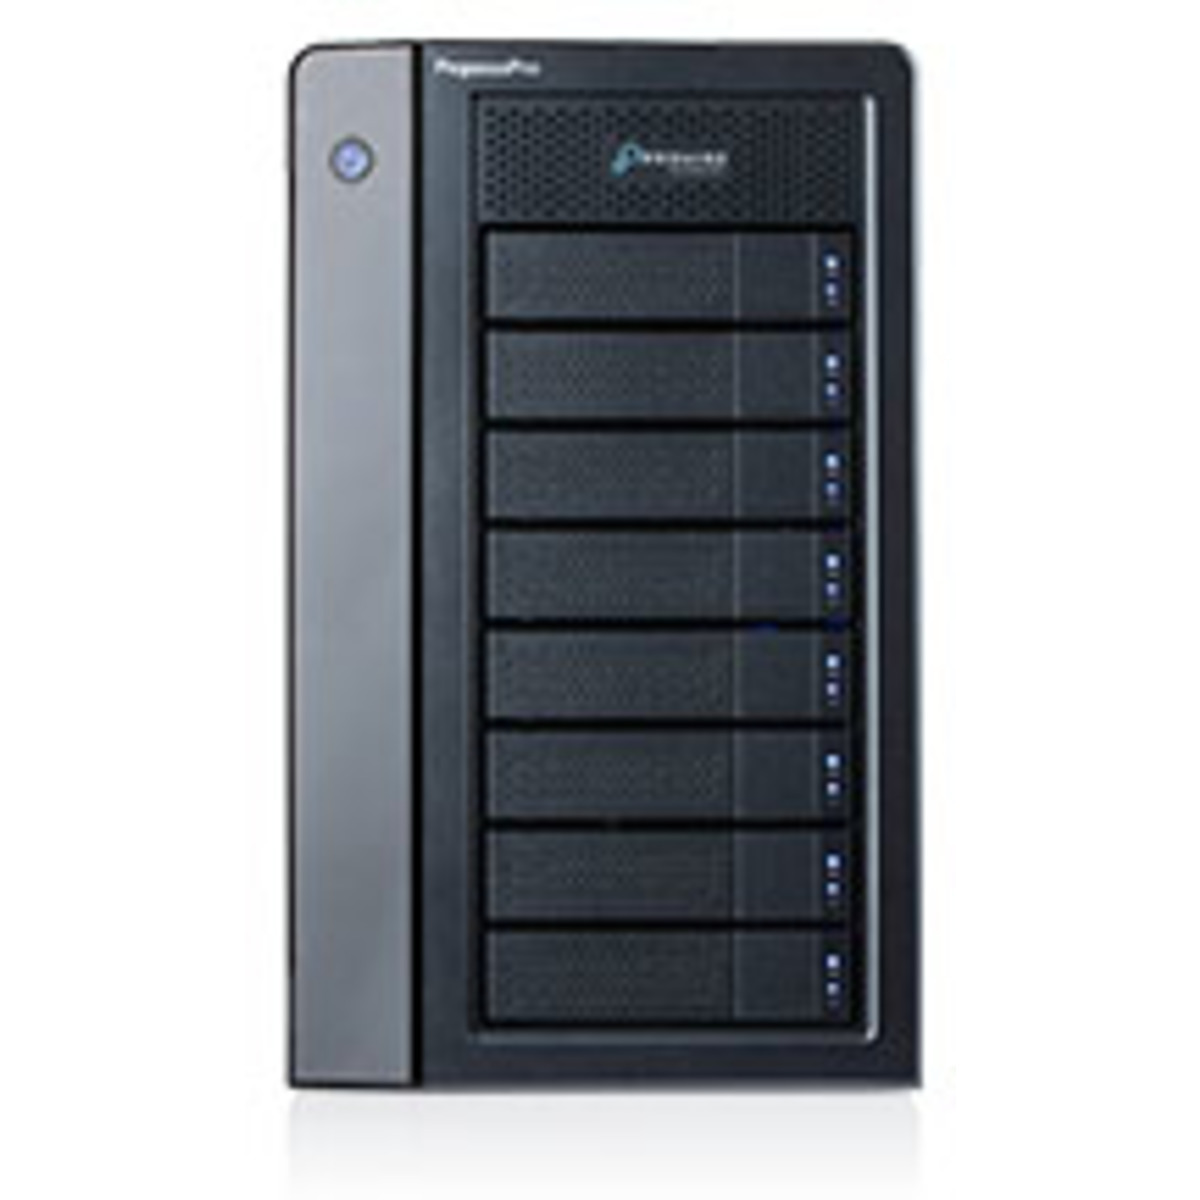 Promise Technology PegasusPro R8 64tb 8-Bay Desktop Multimedia / Power User / Business DAS-NAS - Combo Direct + Network Storage Device 8x8tb Seagate IronWolf ST8000VN004 3.5 7200rpm SATA 6Gb/s HDD NAS Class Drives Installed - Burn-In Tested PegasusPro R8